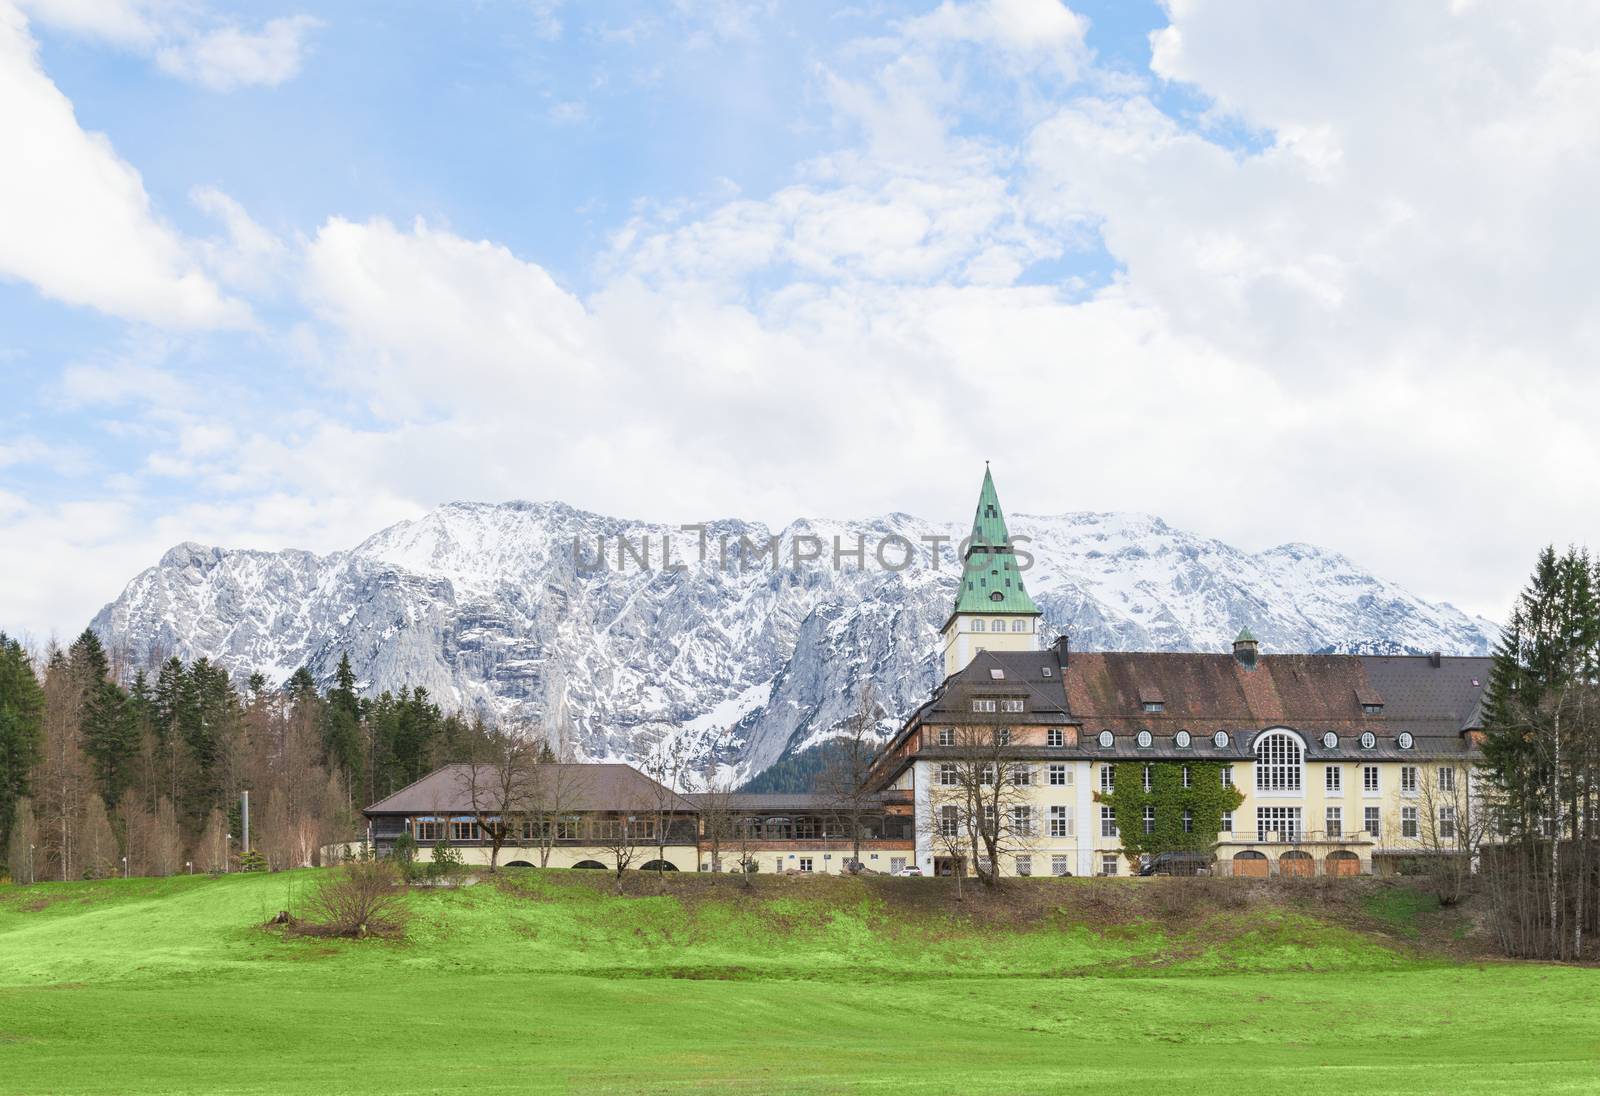 Garmisch, Germany - April 26, 2015: Hotel Schloss Elmau in Bavarian Alpine valley will be the site of the G7 summit in 2015. The G7 has chosen remote venues for its annual meetings for the last several years on security grounds.